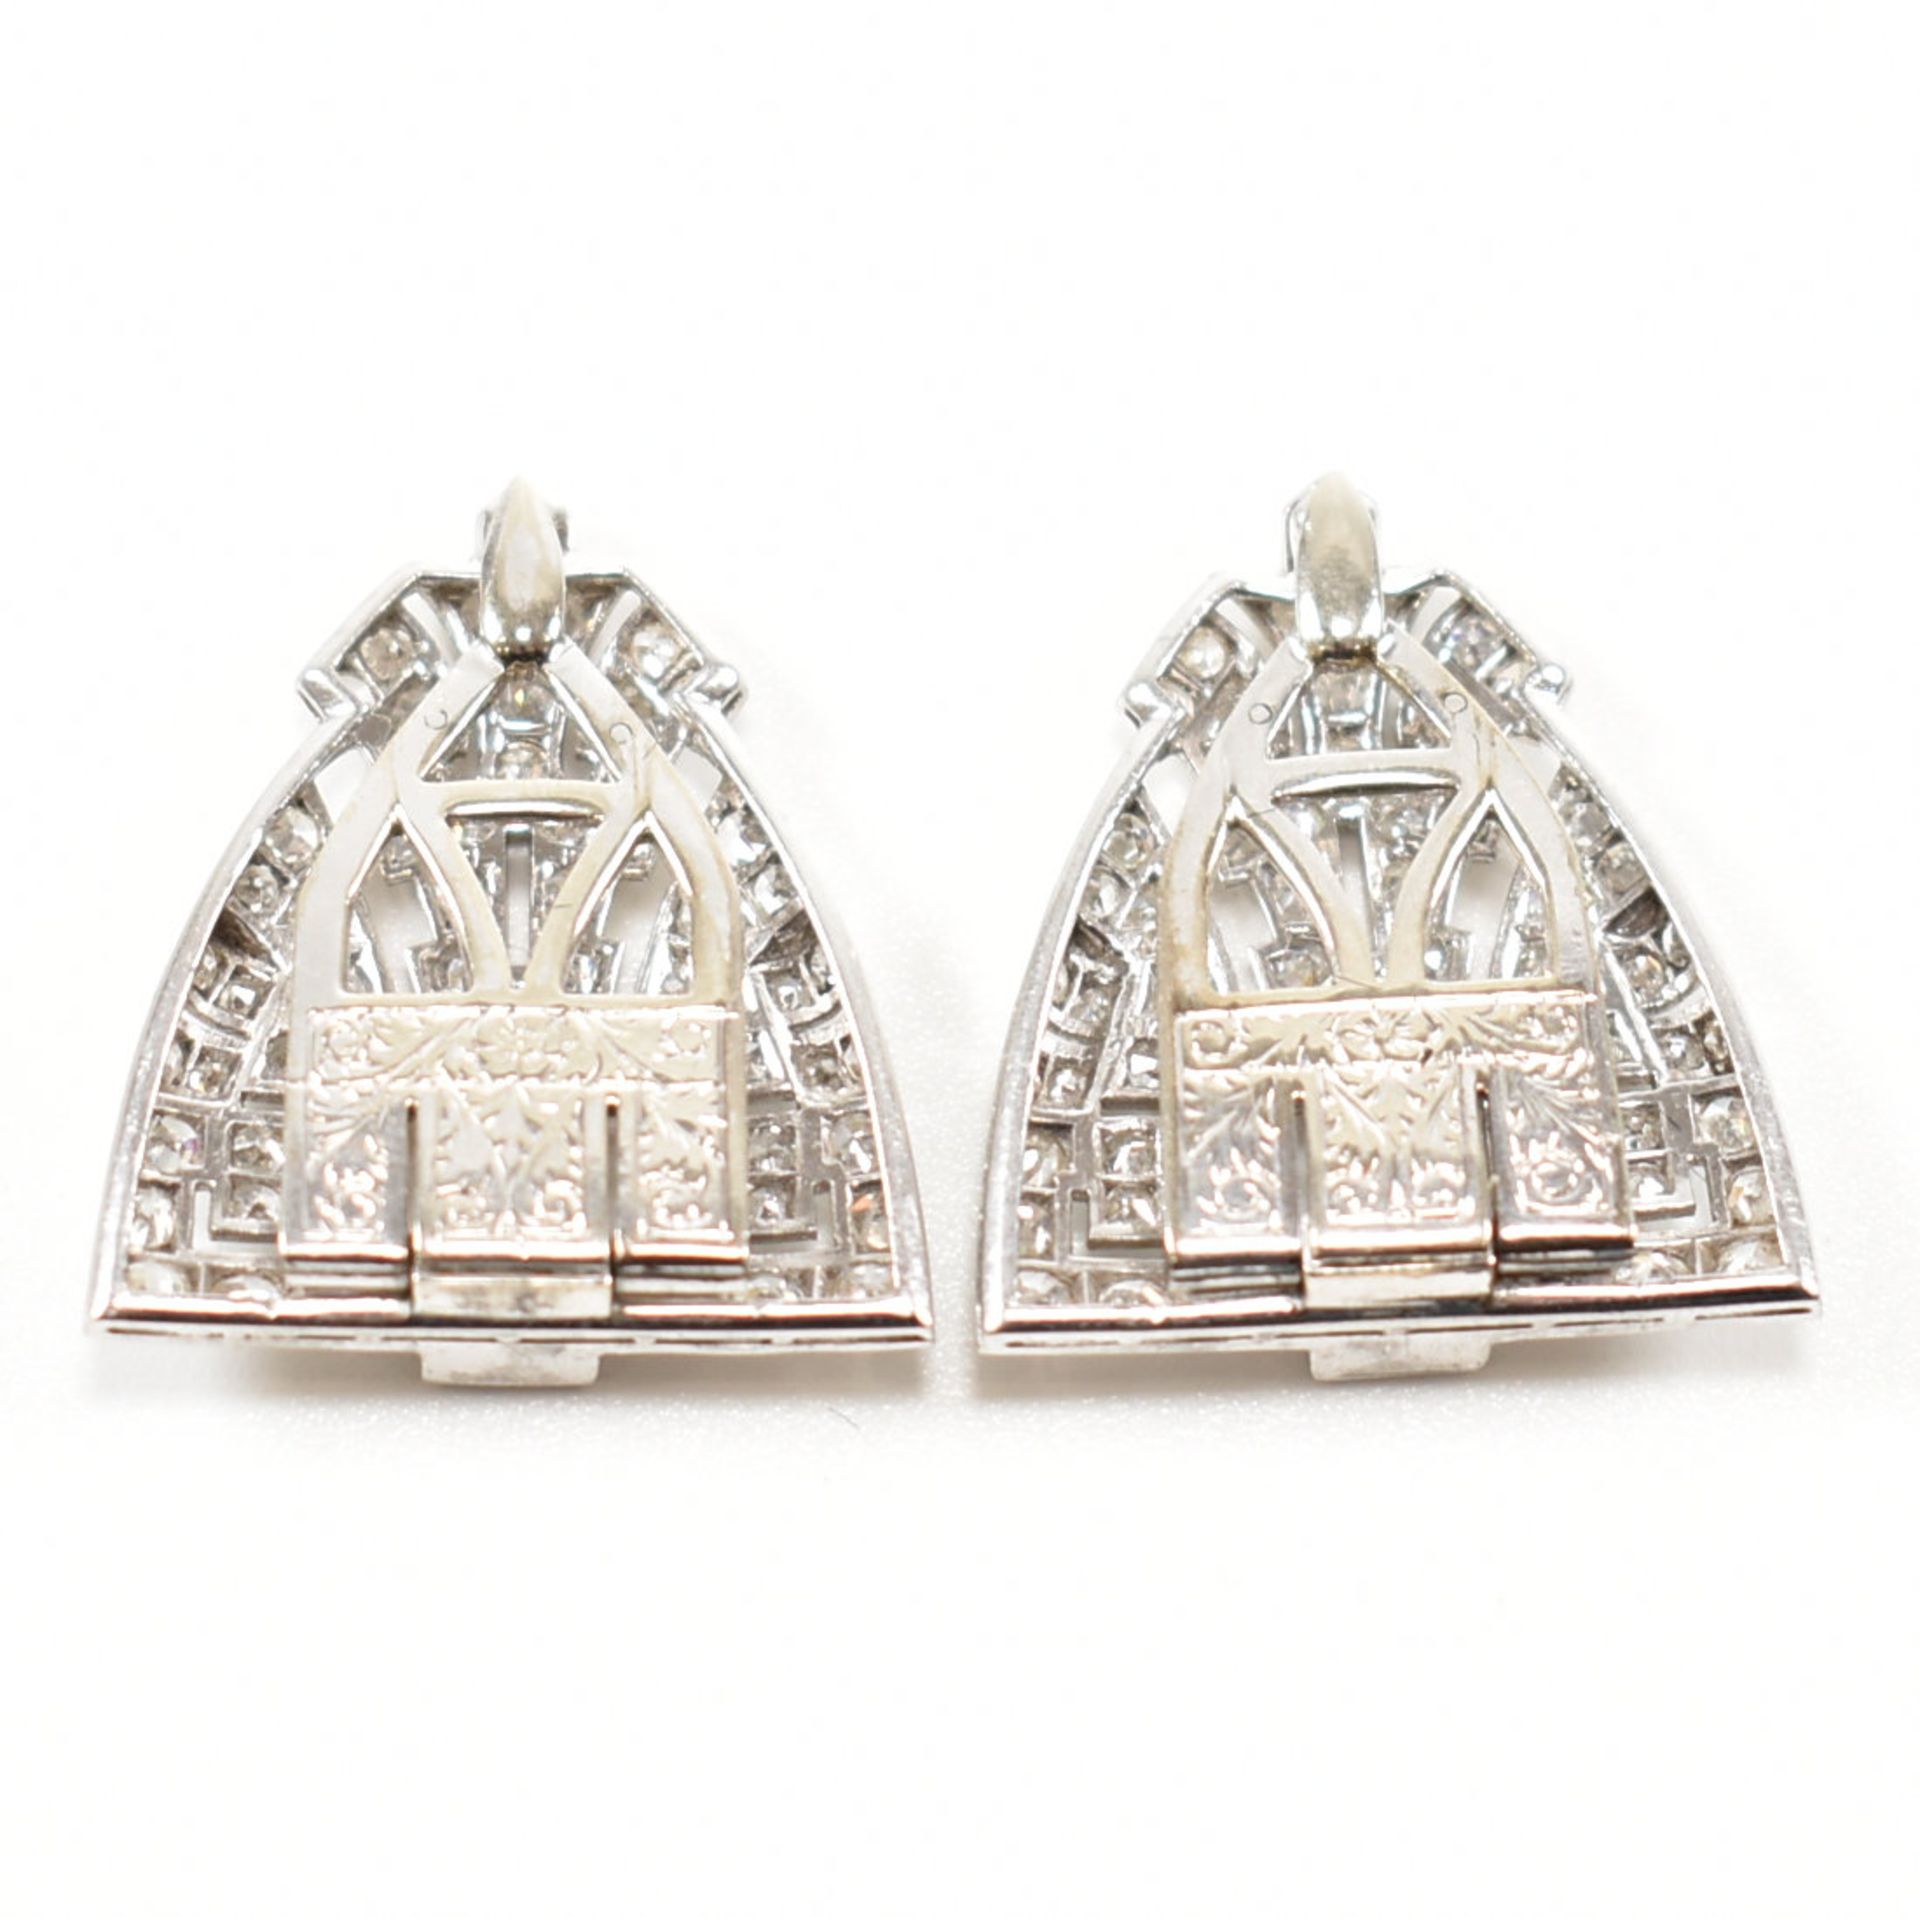 MAPPIN & WEBB - PAIR OF ART DECO DIAMOND DOUBLE DRESS CLIPS - Image 5 of 10